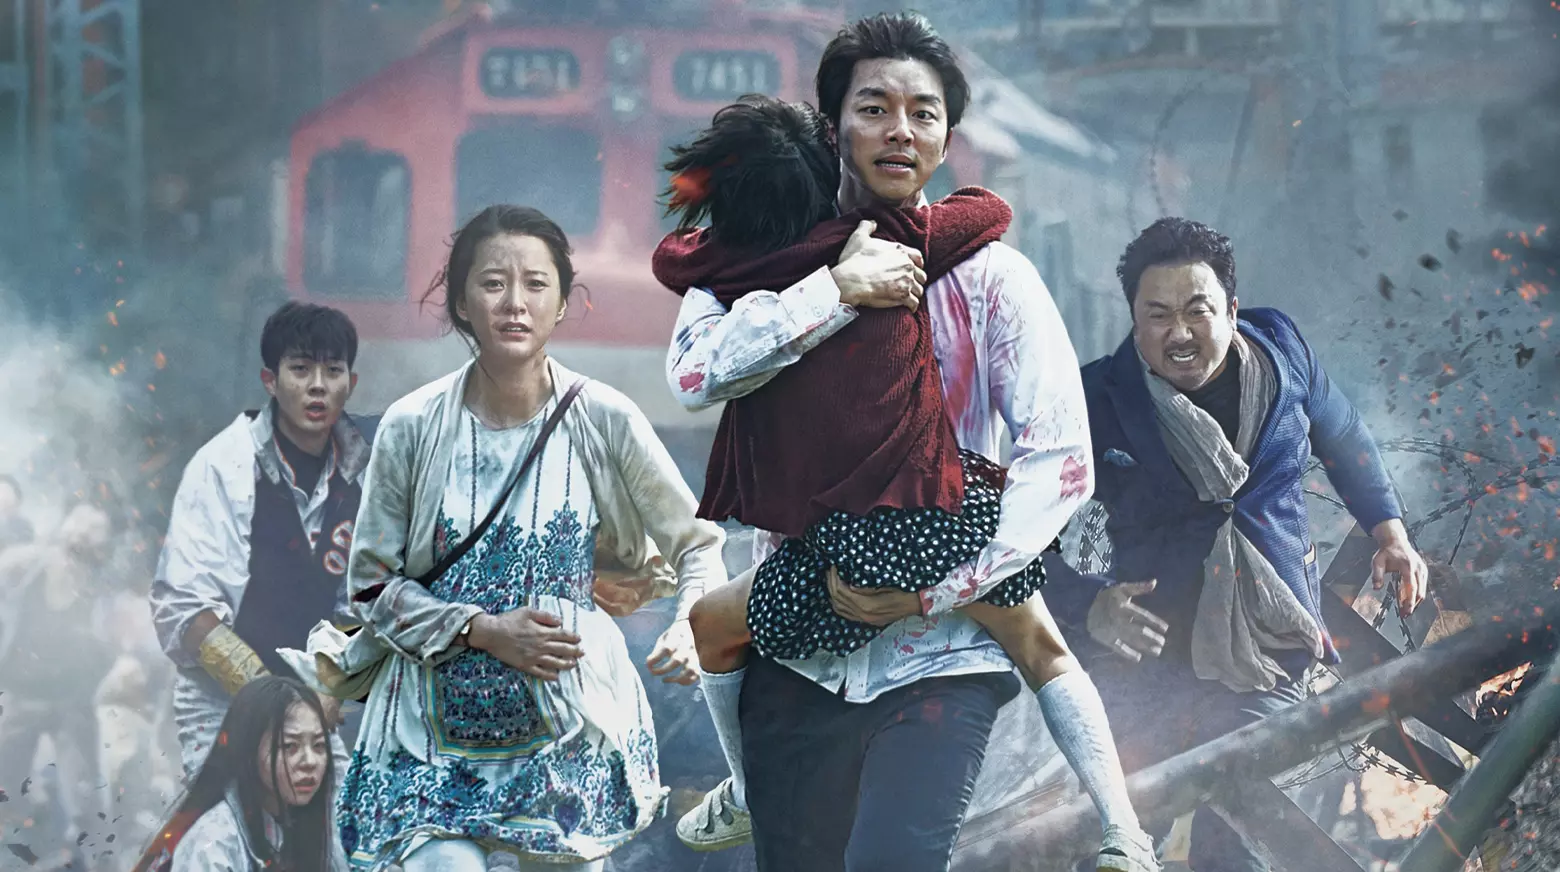 The characters from the film, Train to Busan, running away, while a man holds his daughter in his arms.